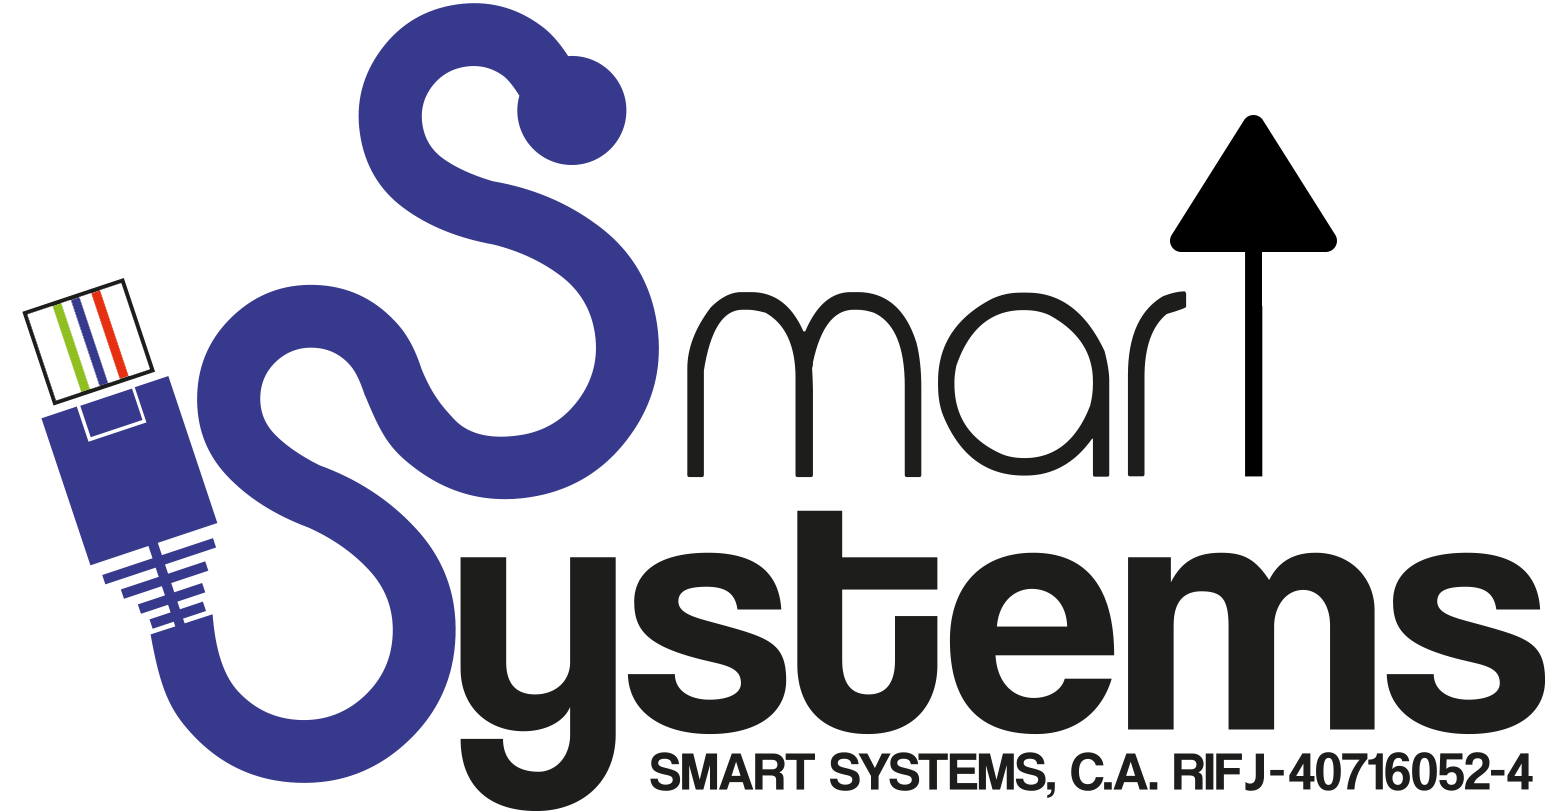 Smart Systems, C.A.